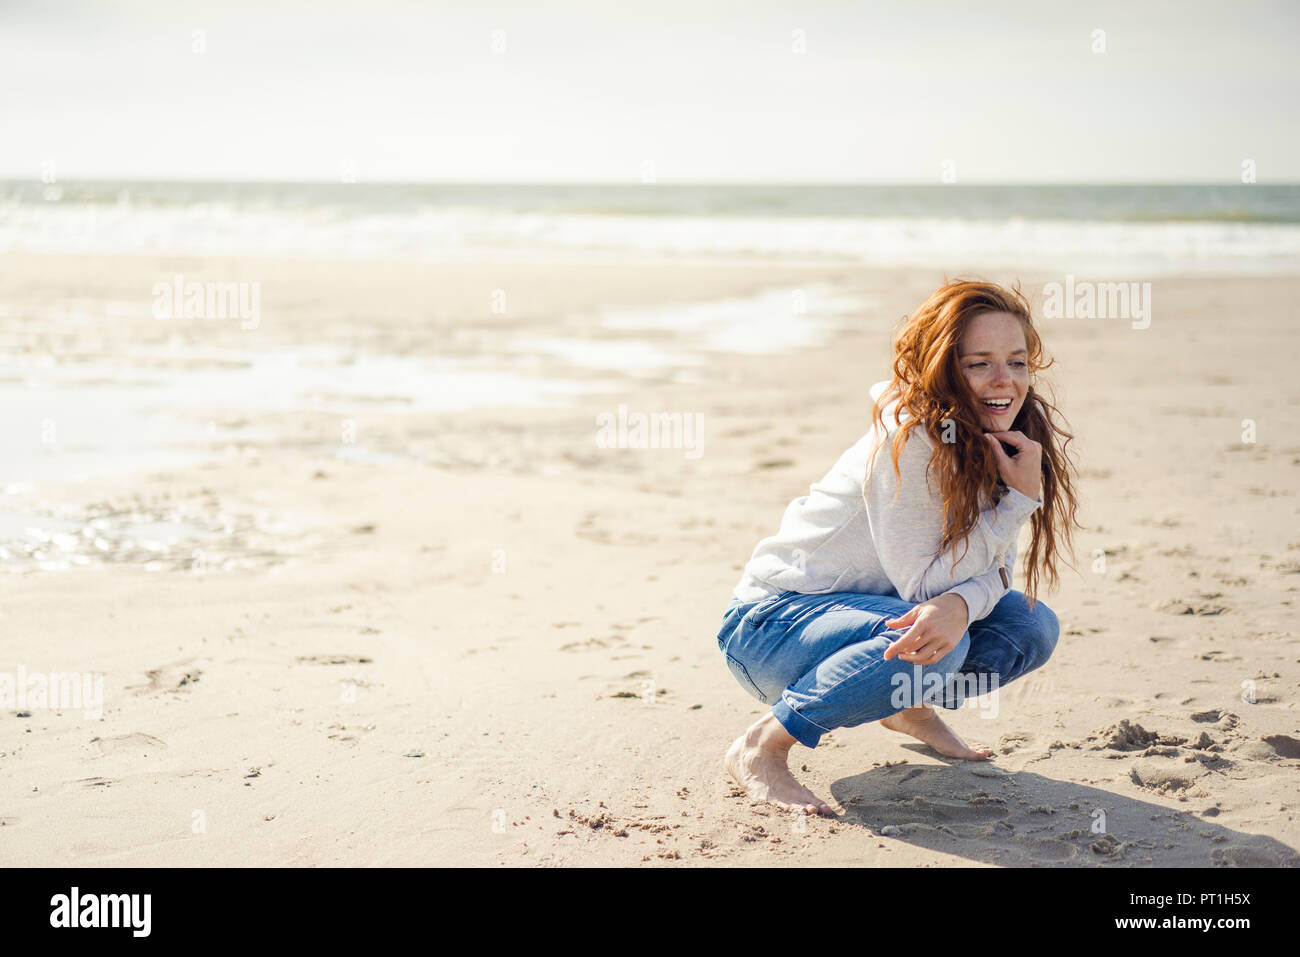 Redheaded woman relaxing on the beach, crouching Stock Photo